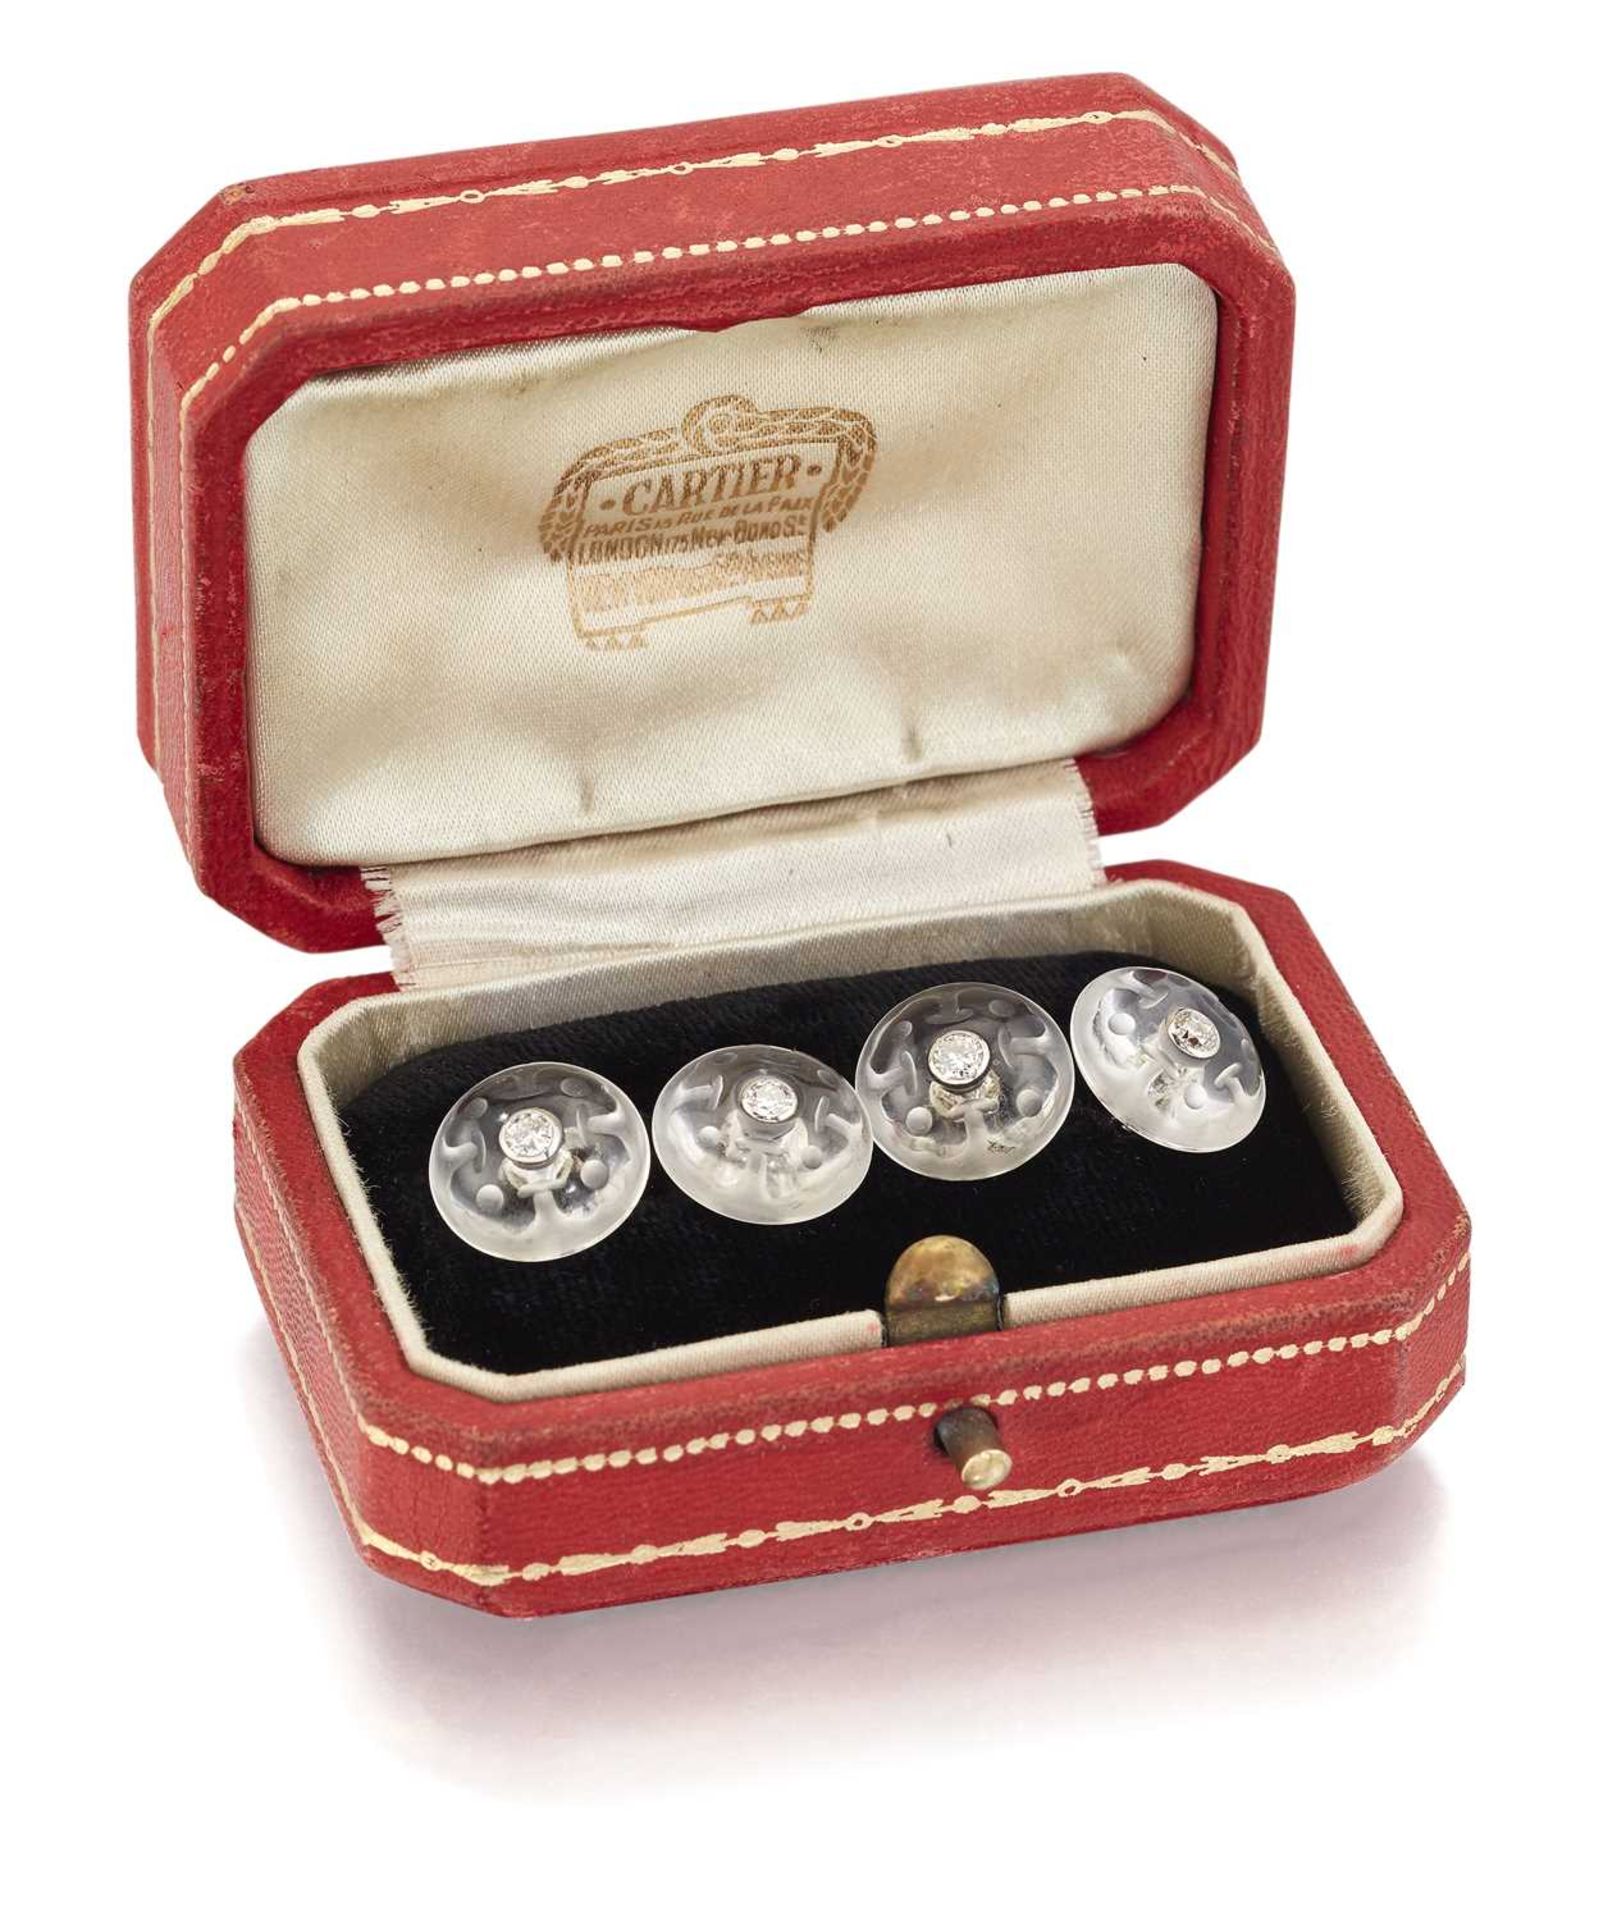 CARTIER - A PAIR OF ROCK CRYSTAL AND DIAMOND DOUBLE CUFFLINKS - Image 2 of 2